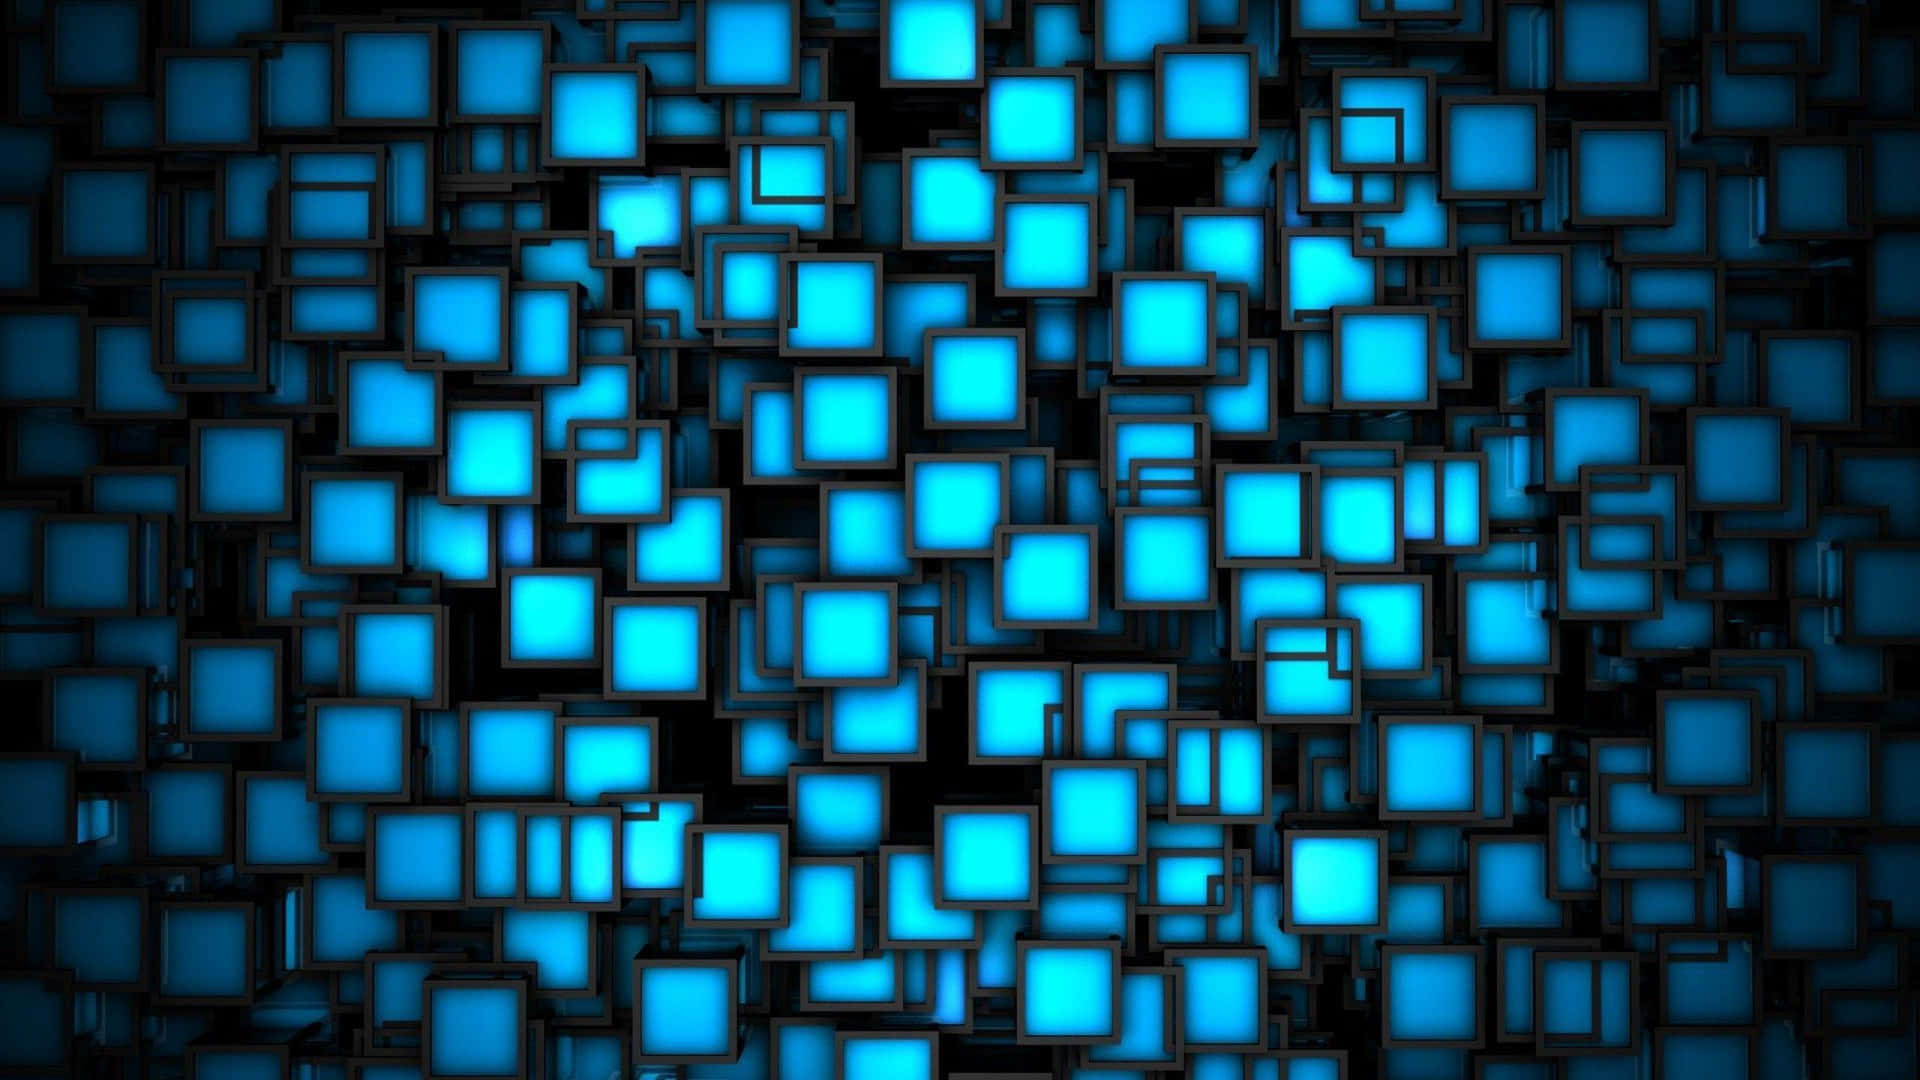 Blue Squares In A Dark Background Wallpaper